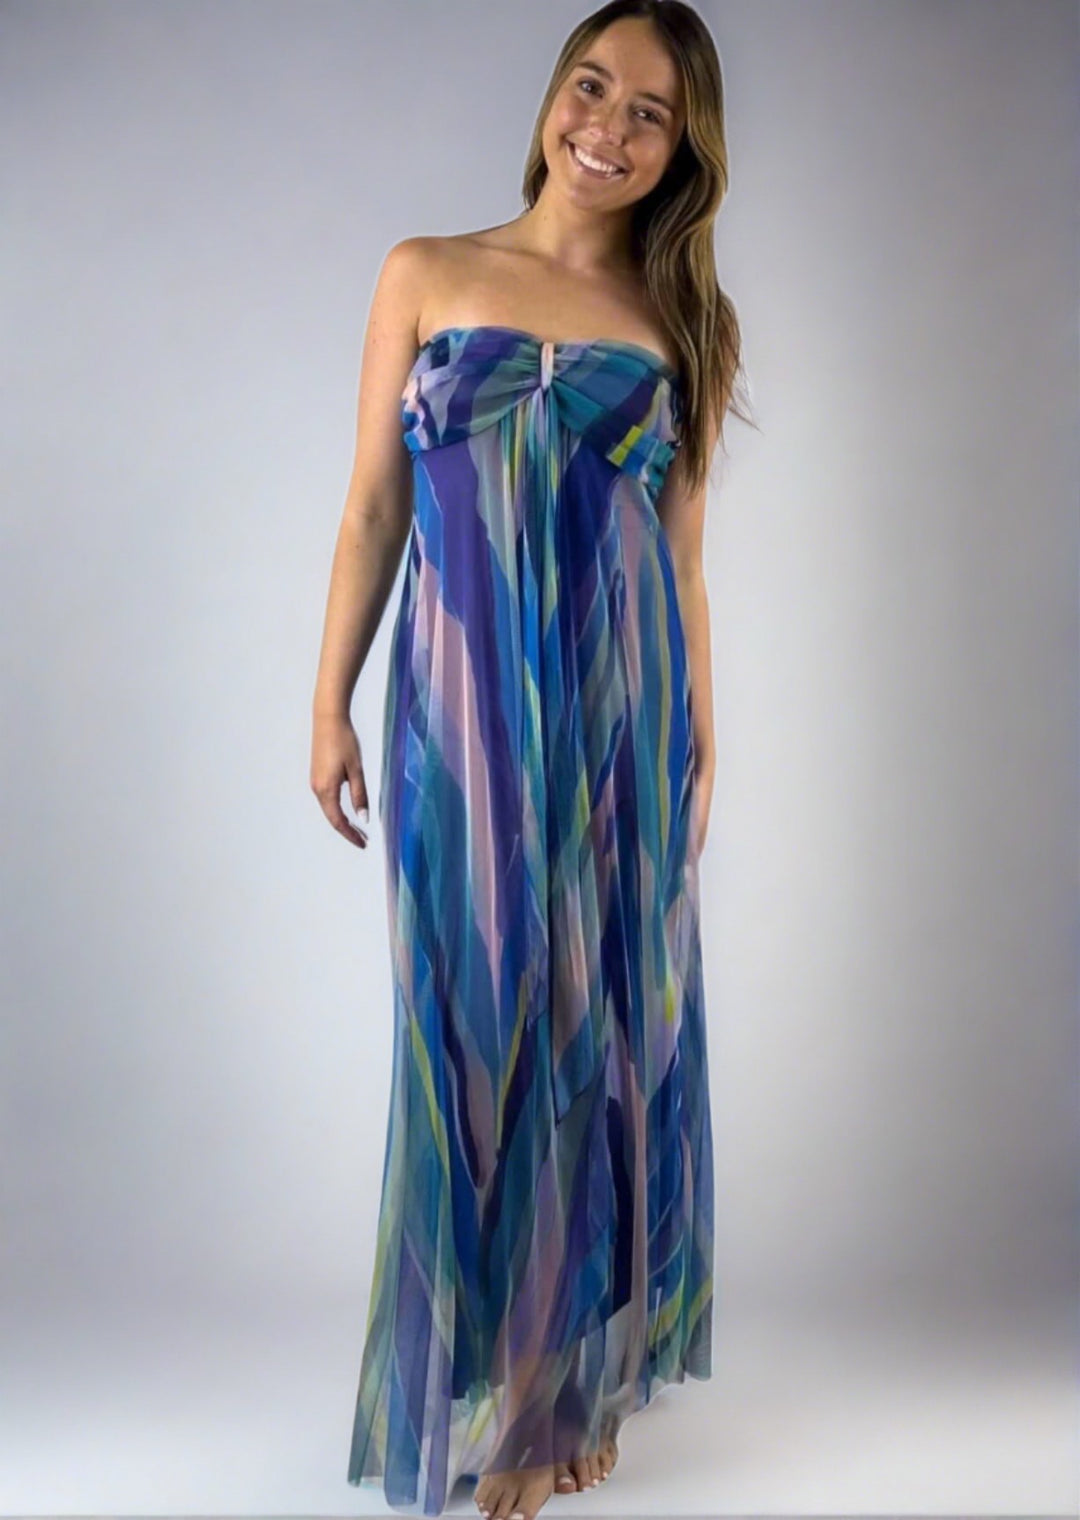 Made in USA Elana Kattan AQURELLE 817 Gorgeous Strapless Mesh Empire Waist Dress with print in watercolor shades | Perfect for Weddings, Evening Events, Prom, Formals, Resort Evening 